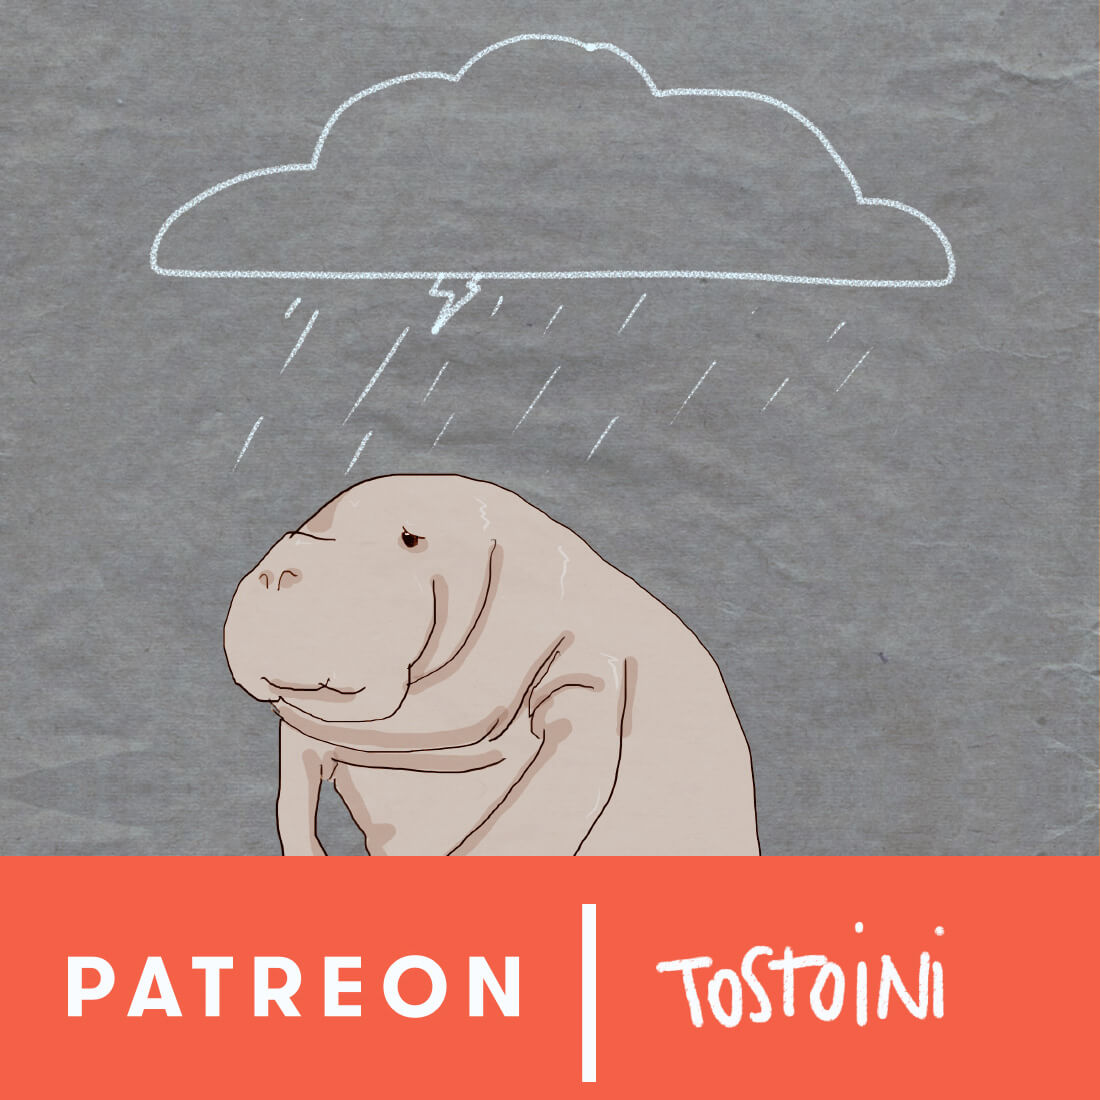 tostoini patreon early access